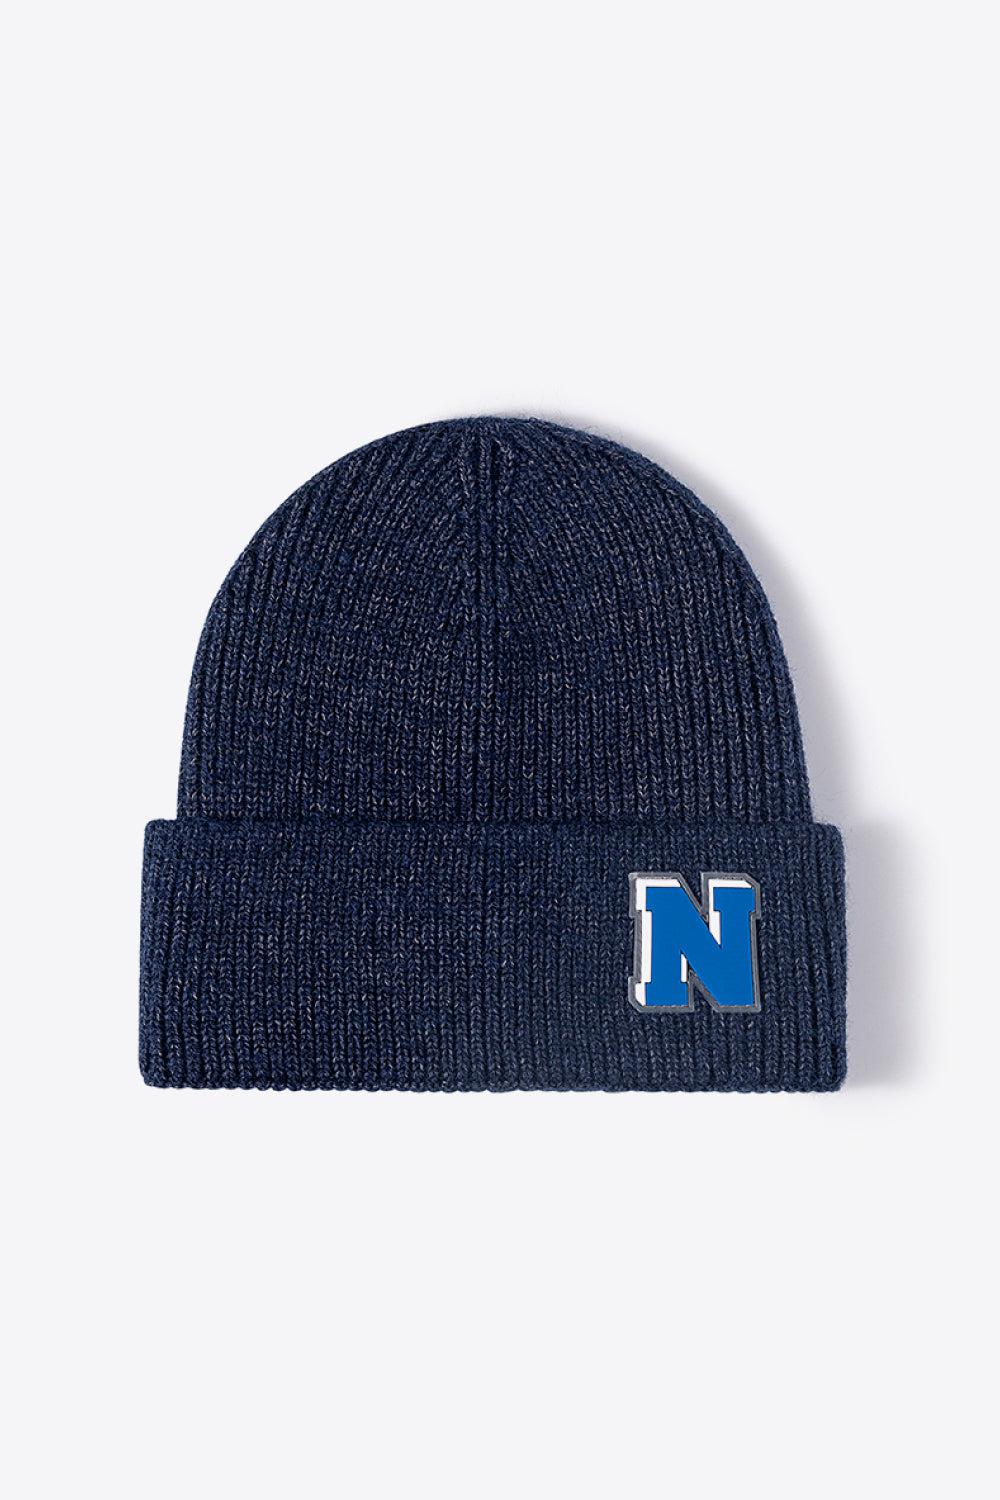 Letter N Patch Cuffed Knit Beanie-[Adult]-[Female]-Navy-One Size-2022 Online Blue Zone Planet